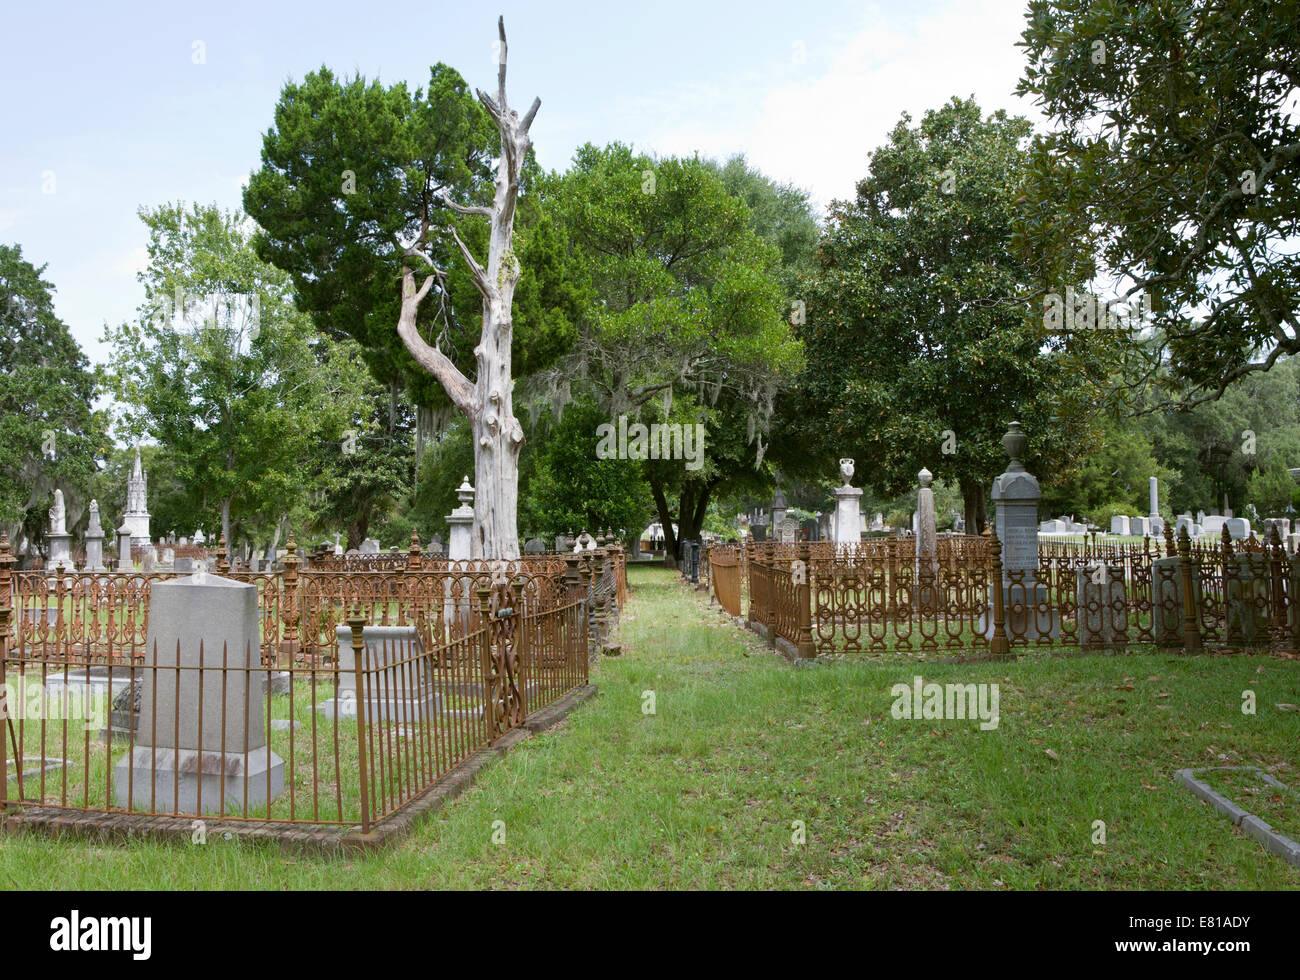 Row of family plots in Magnolia Cemetery, bordered by iron fences. Stock Photo